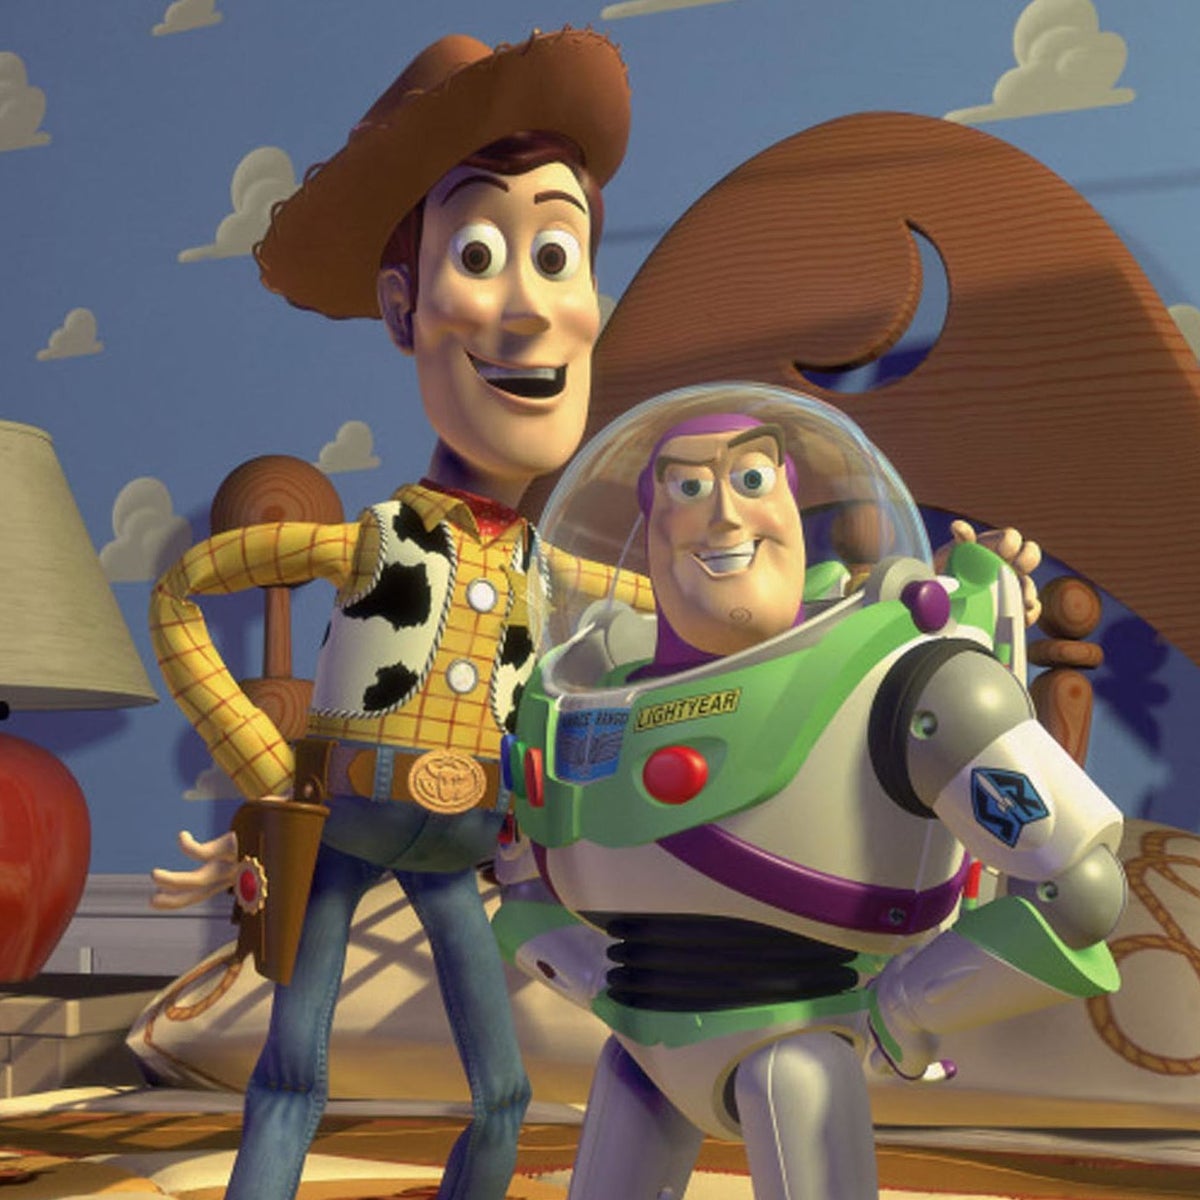 Toy Story 20 years old: A brief history of the Pixar classic | The | The Independent